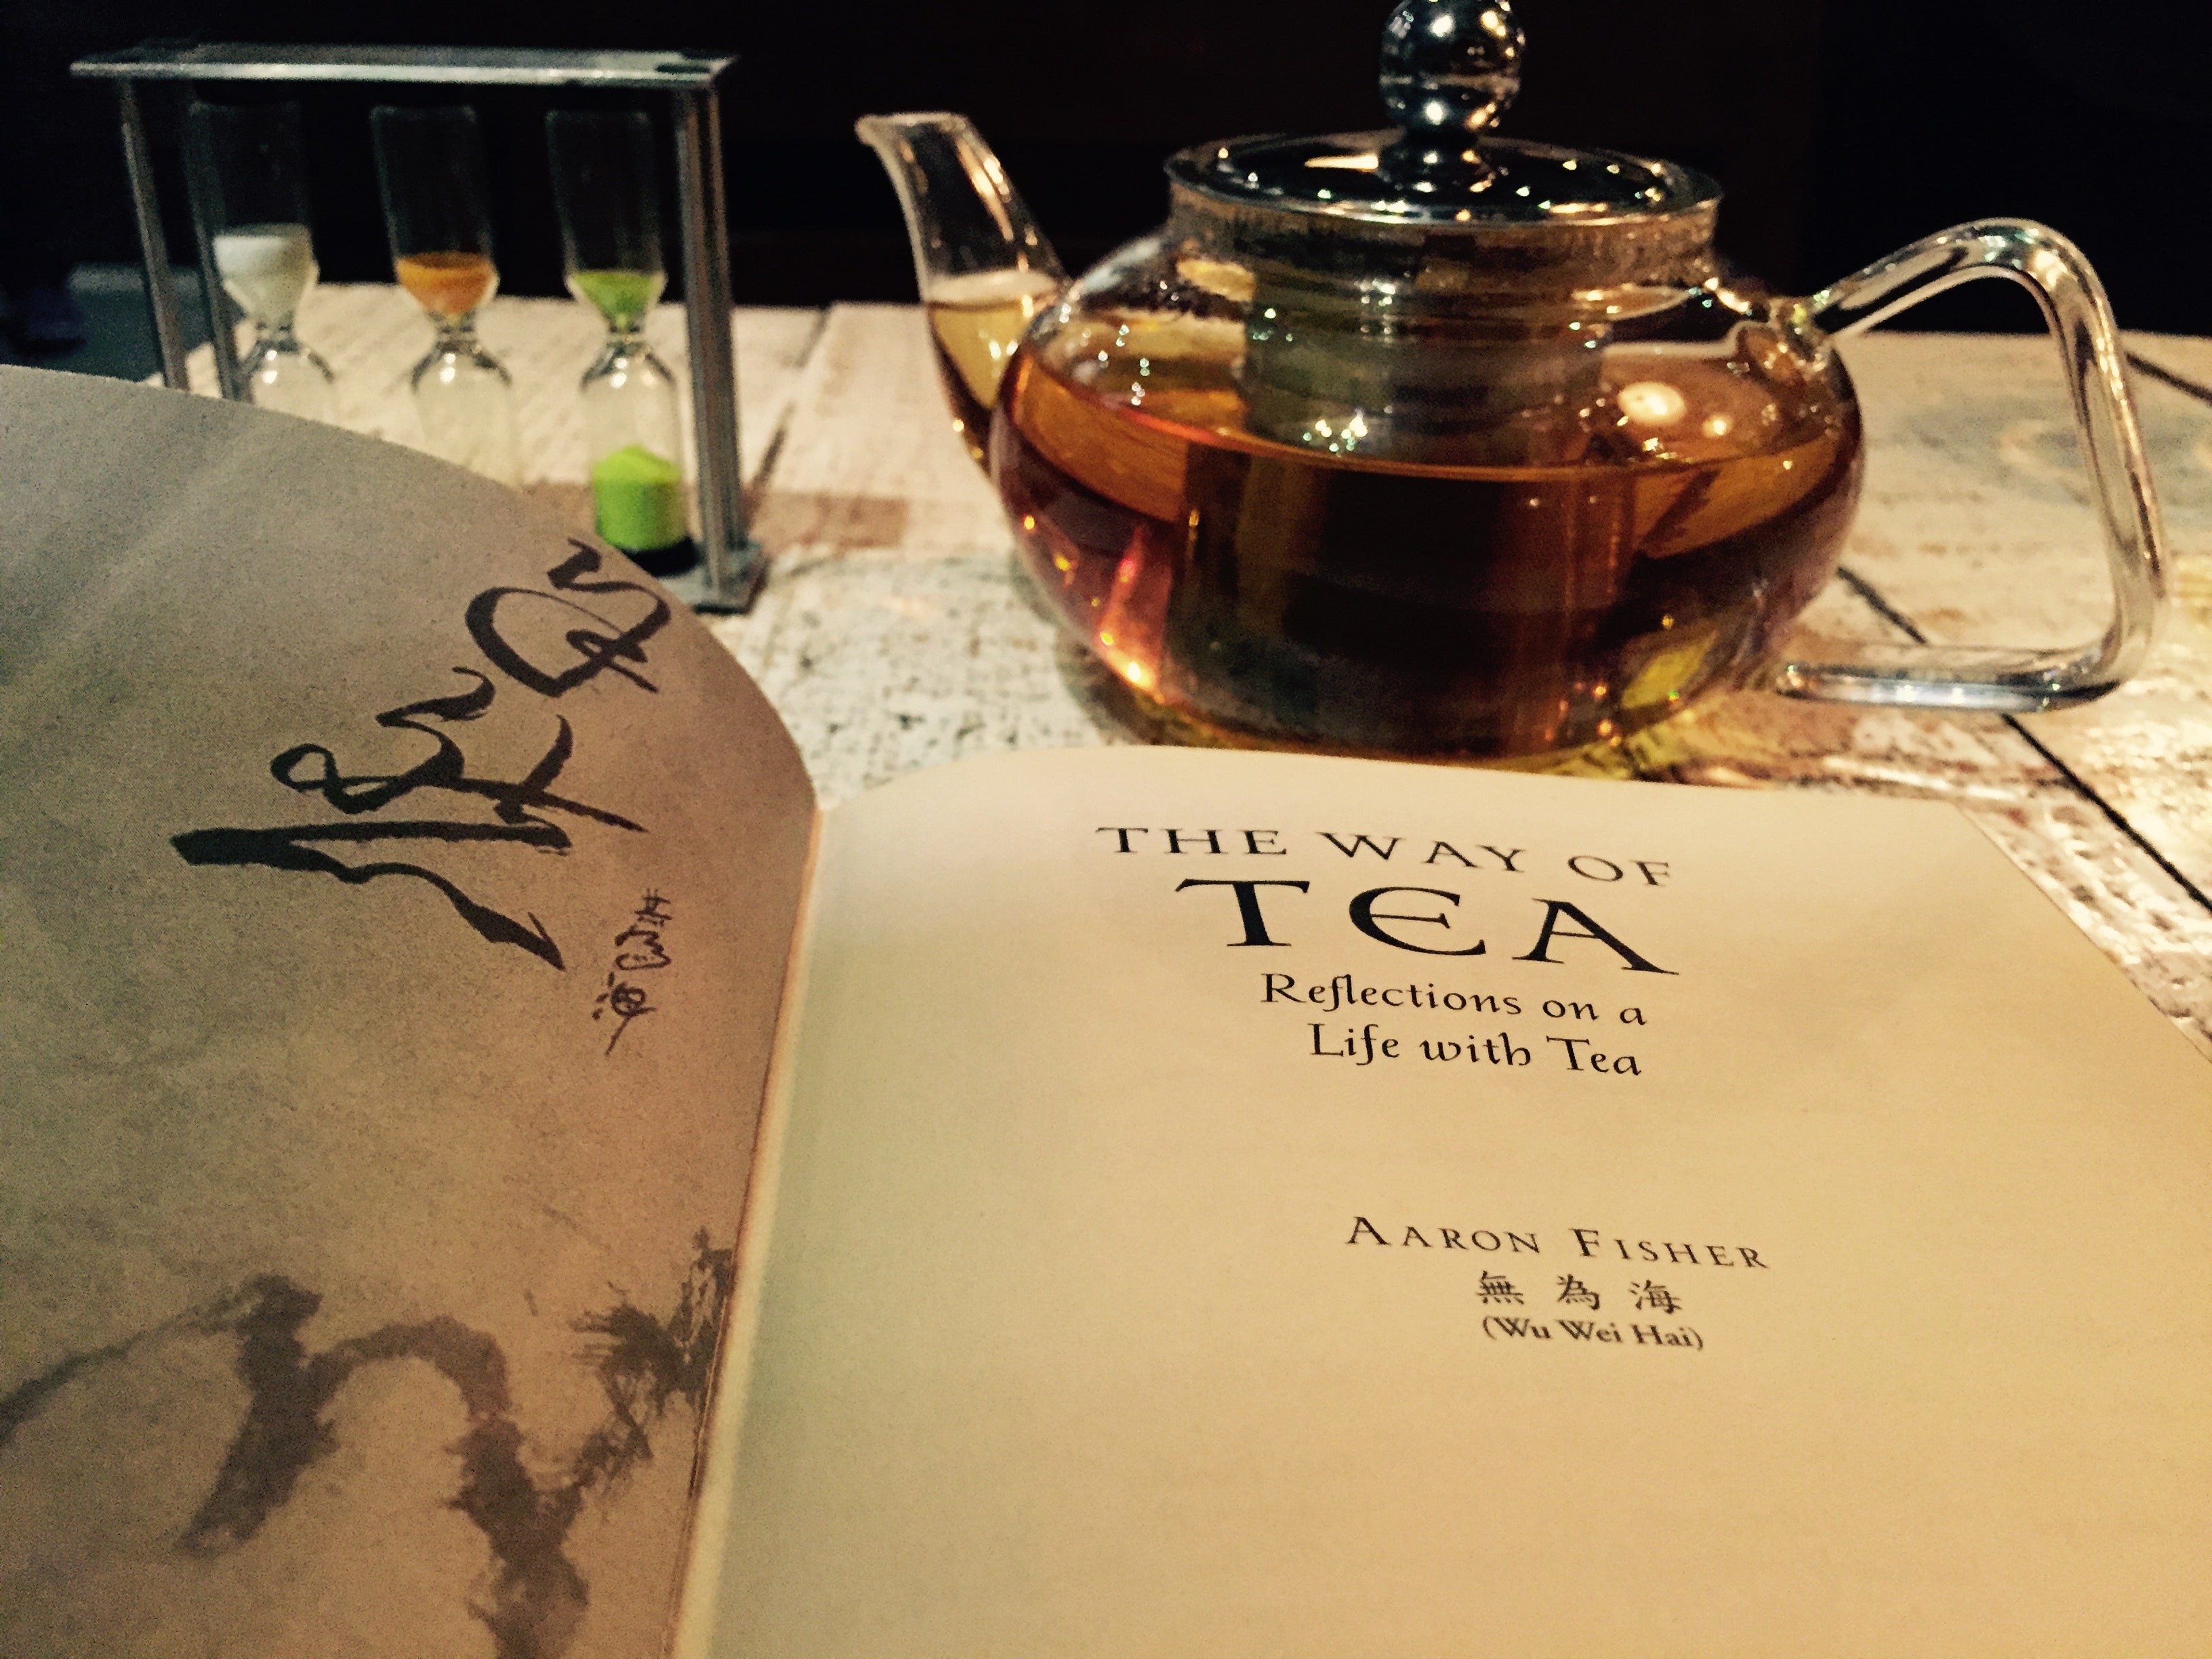 Interesting facts about tea.